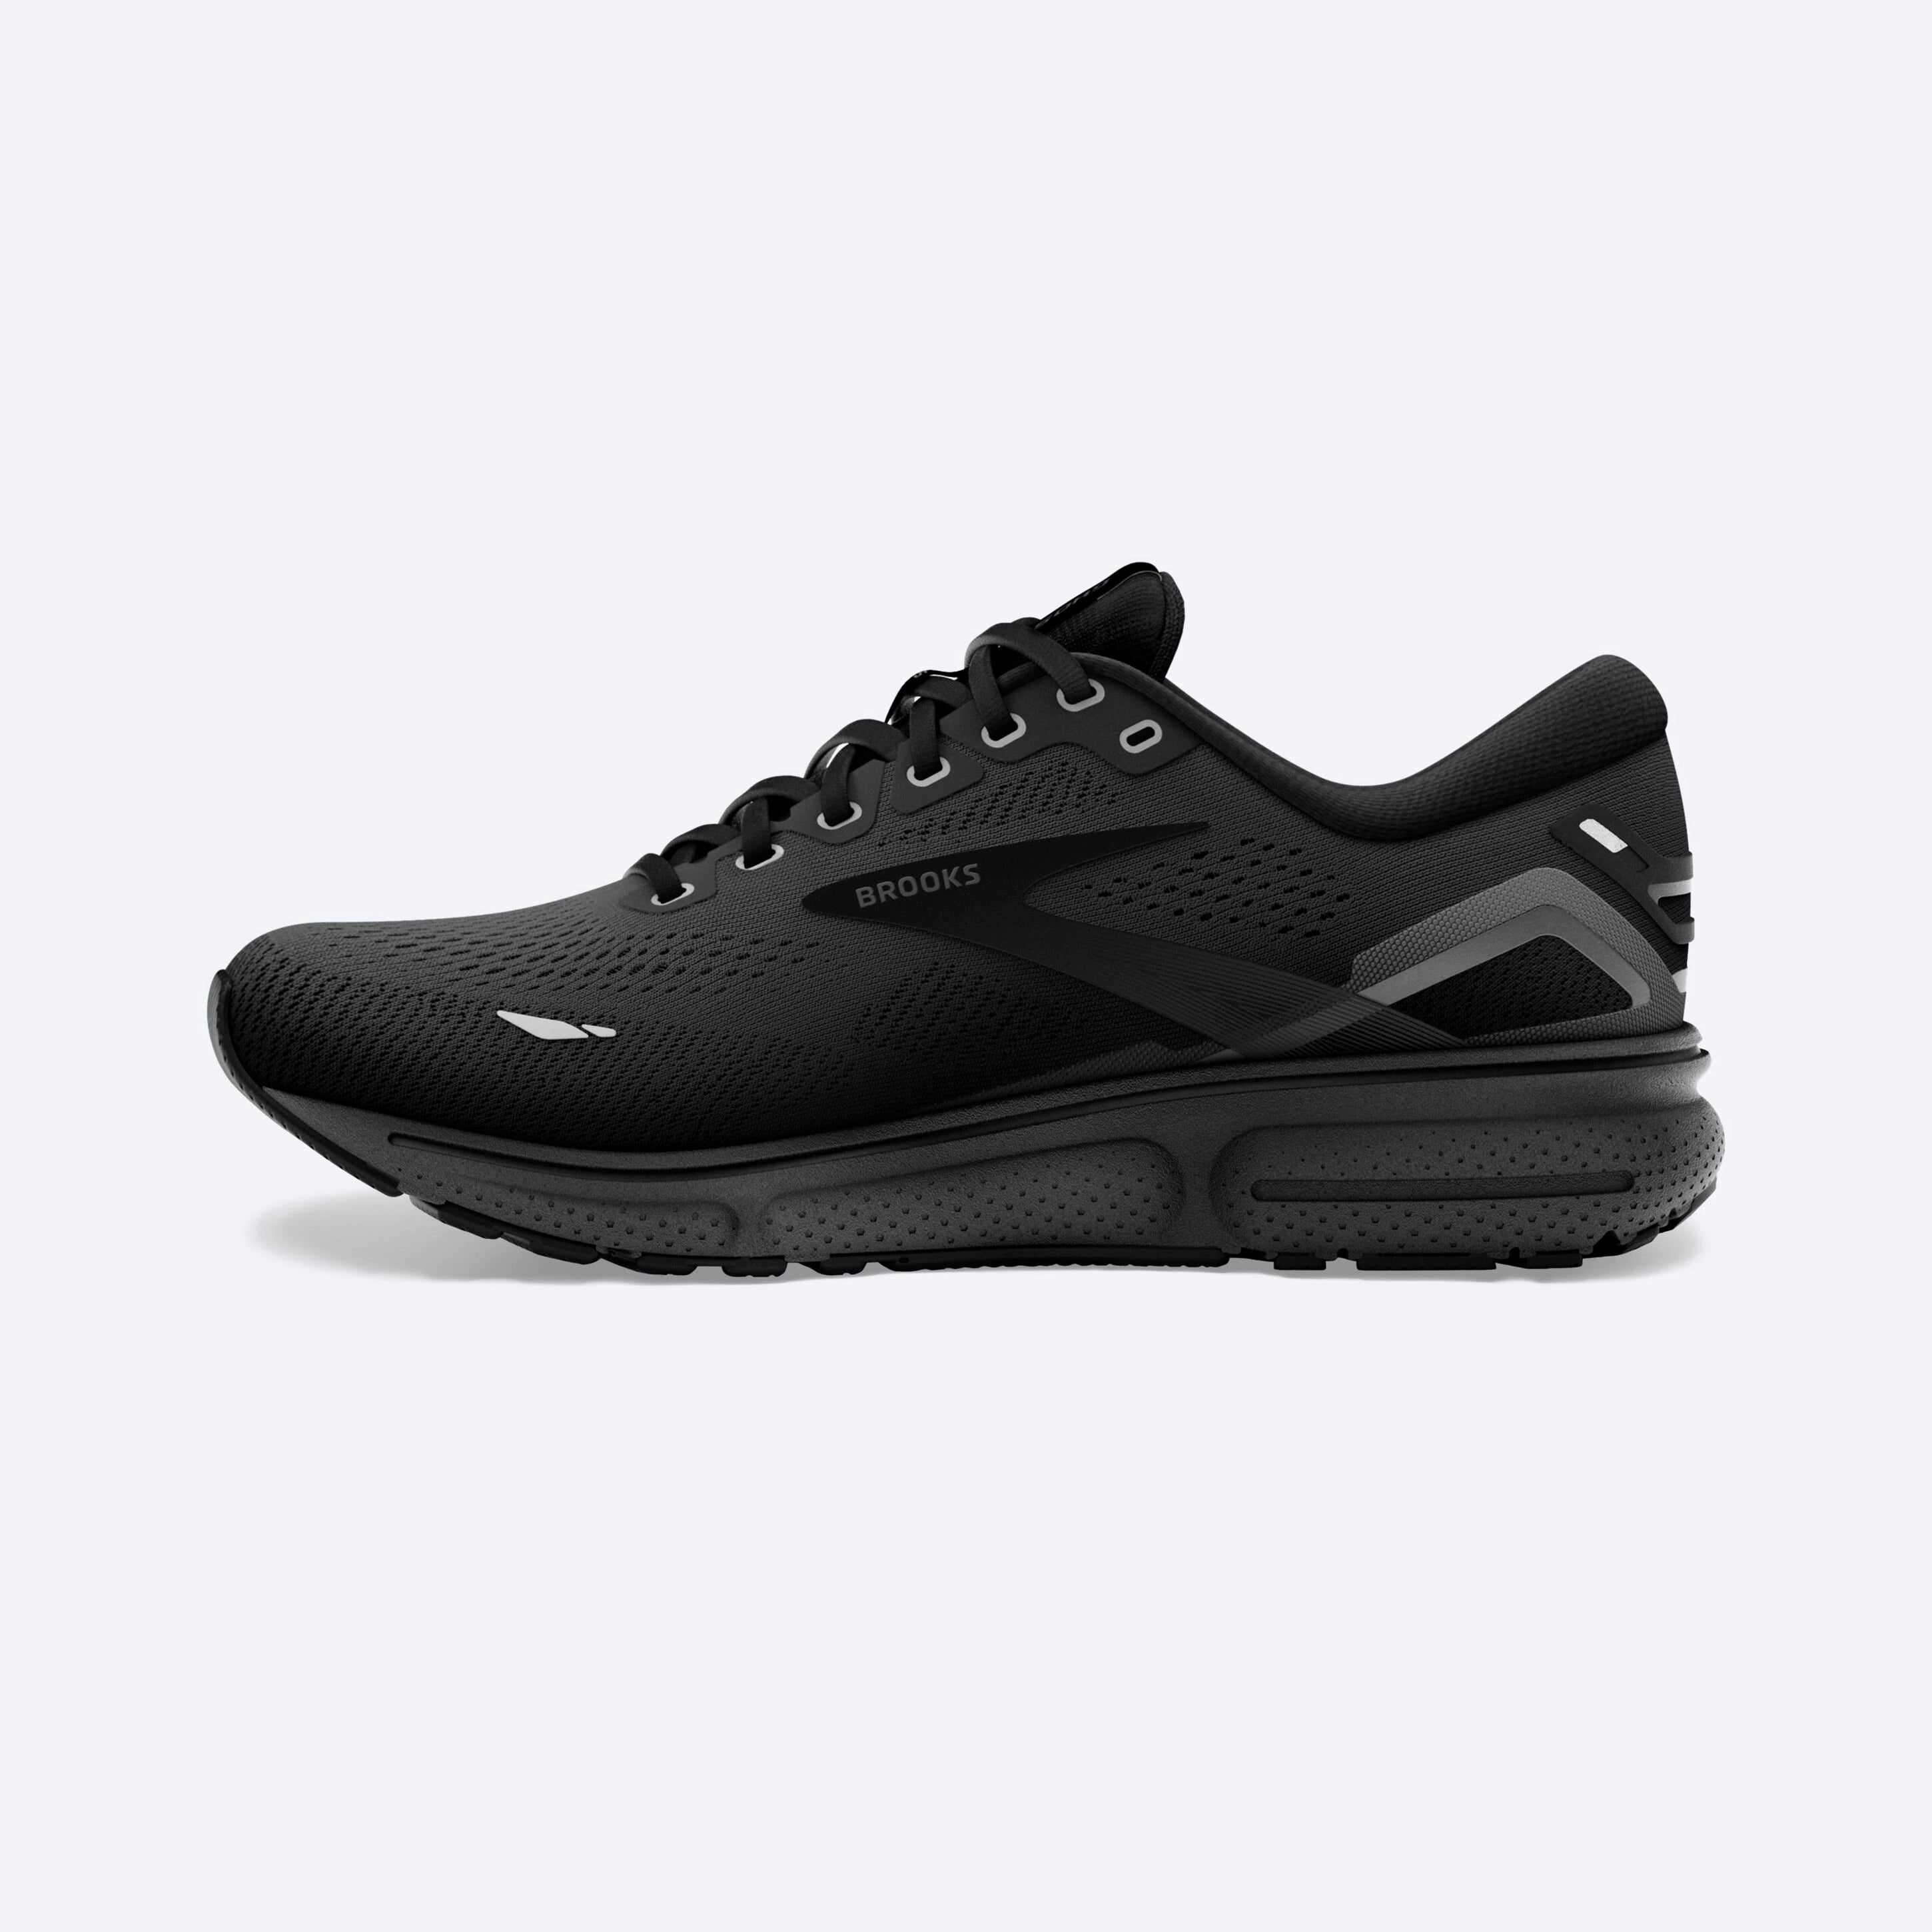 Medial view of the Women's Ghost 15 by Brooks in the wide D width, color all Black